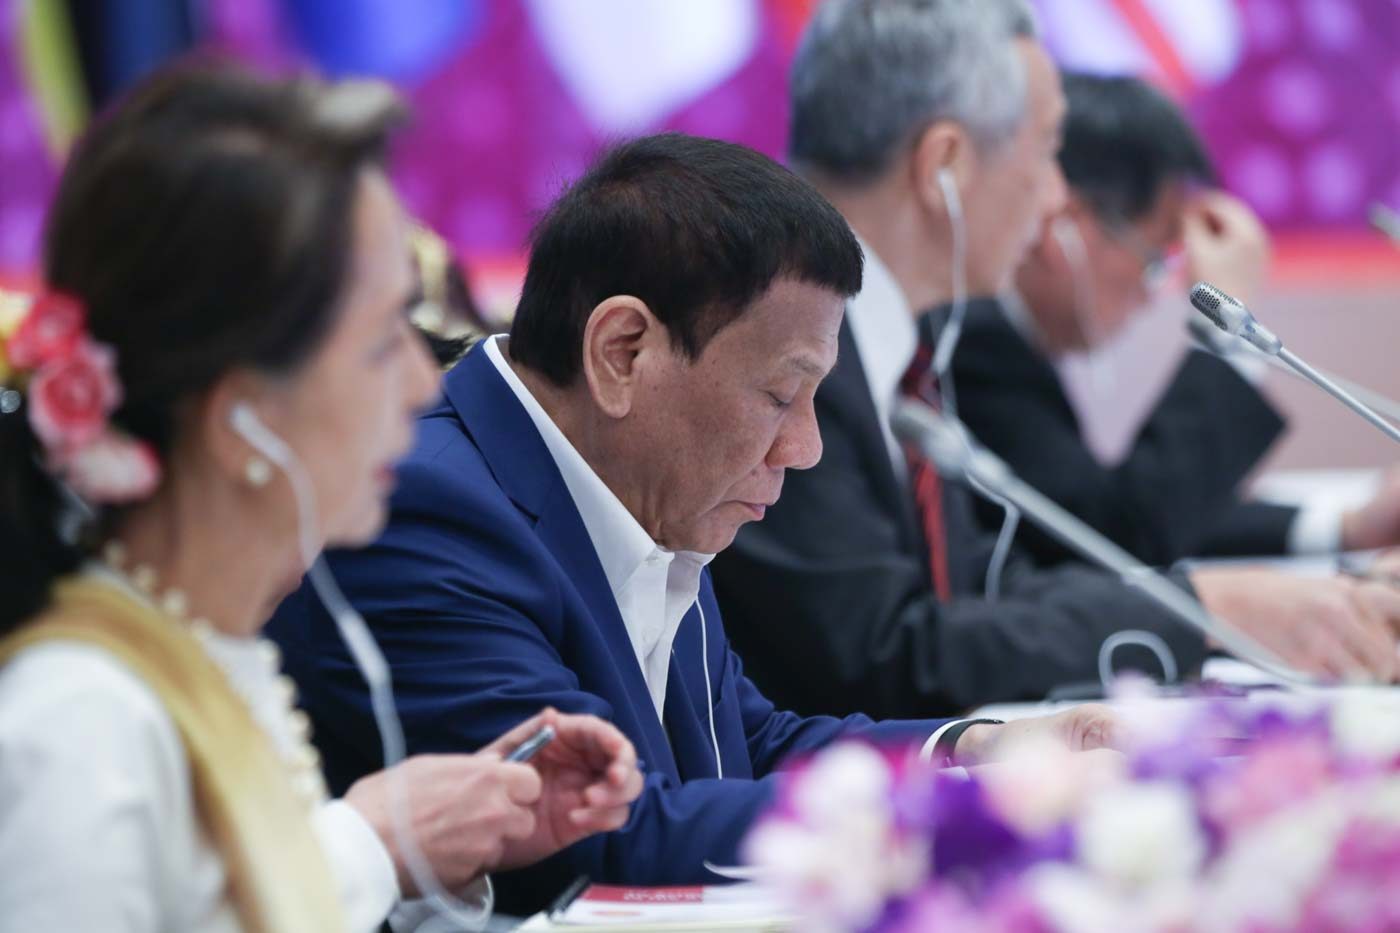 In ASEAN, Duterte vents ‘disappointment’ over sea code delays